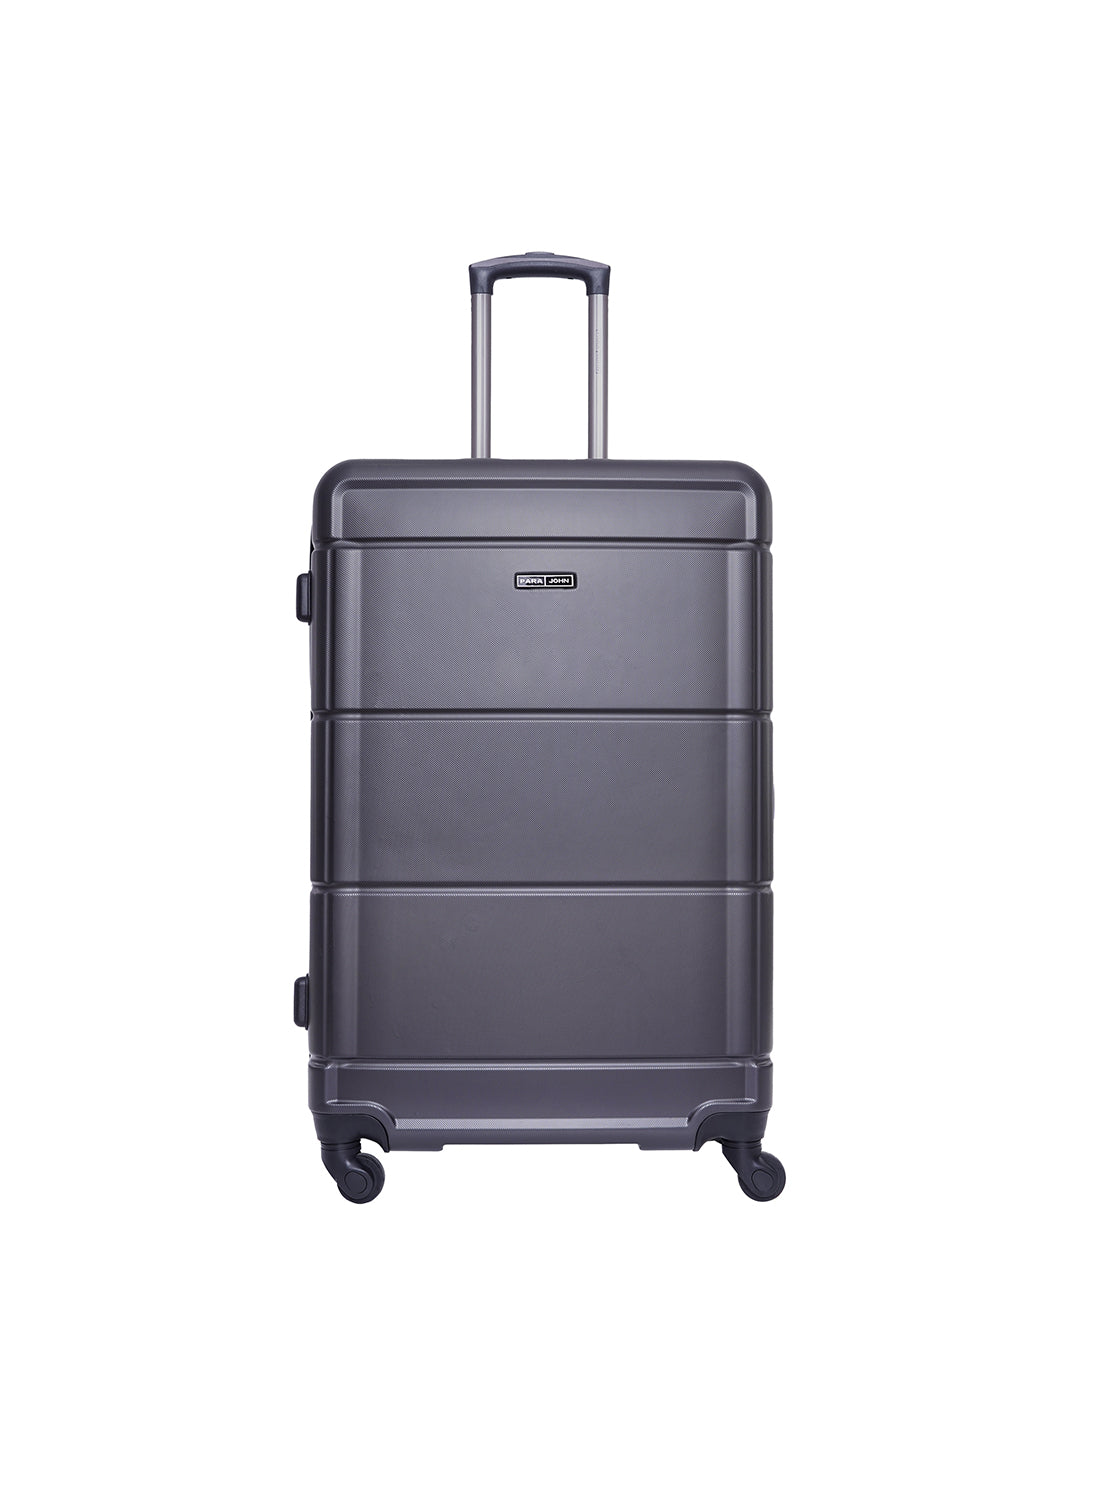 Parajohn 3-Piece Hard Side ABS Luggage Trolley Set 20/24/28 Inch